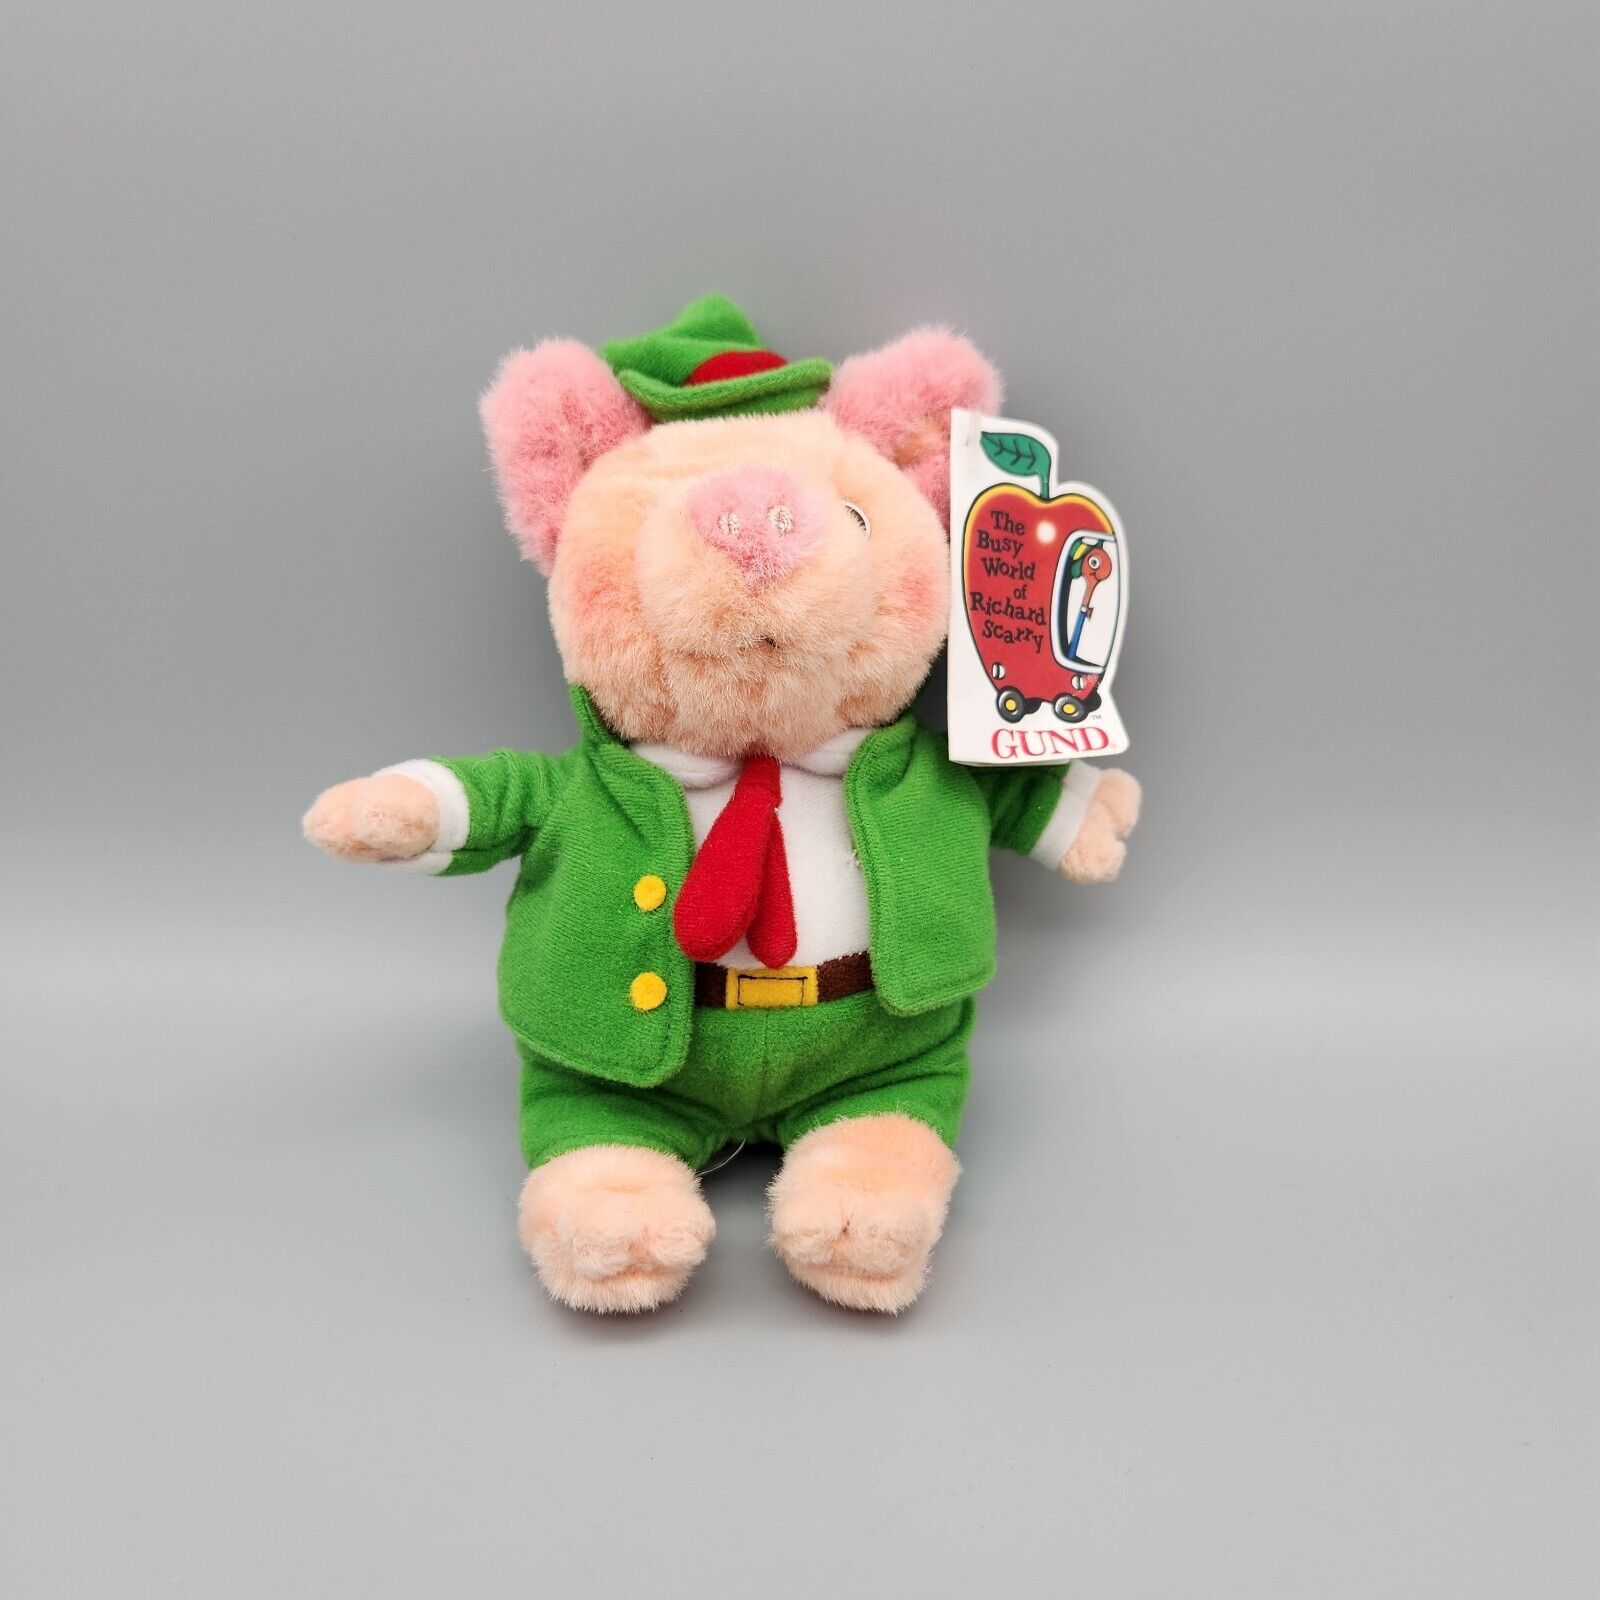 Vintage The Busy World of Richard Scarry Mr Frumble Pig Plush 1995 Gund 7\